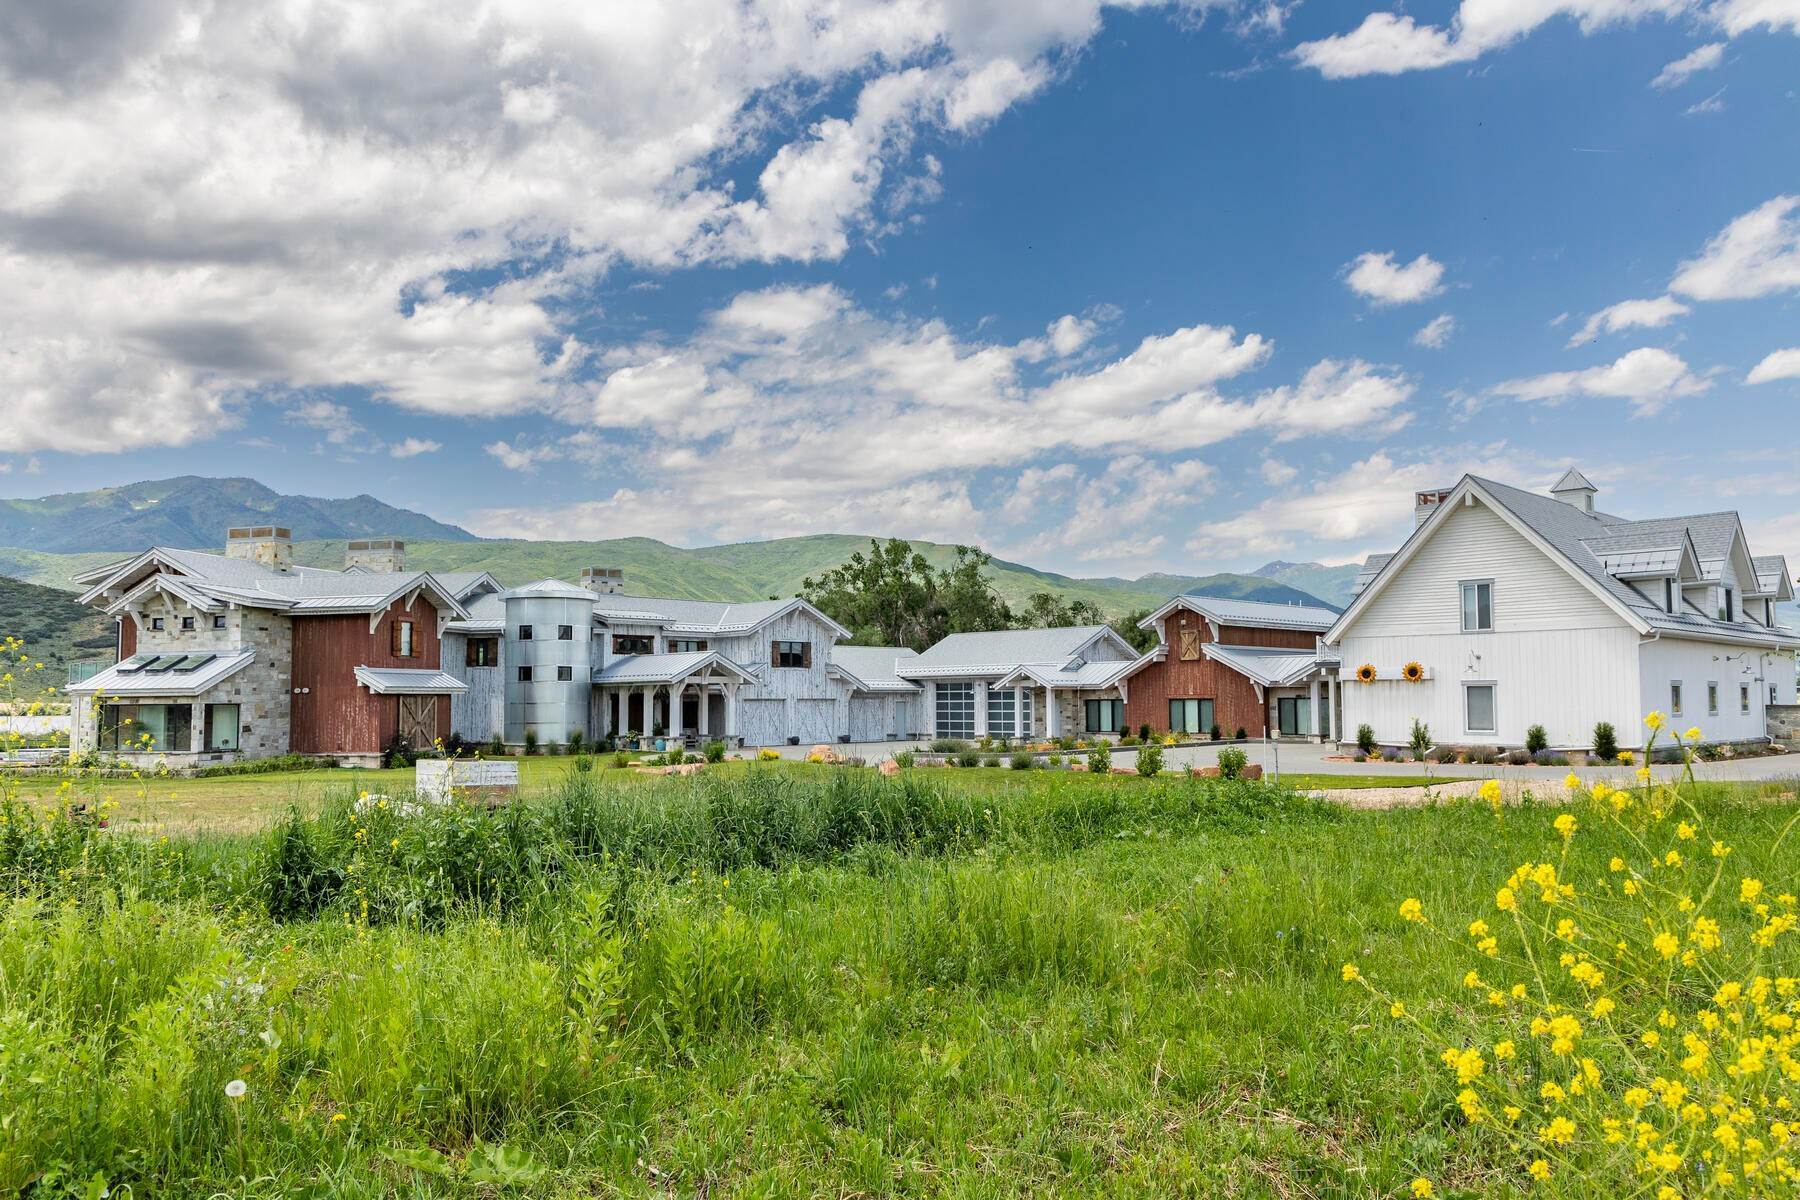 Single Family Homes for Sale at Organic as Possible 2790 S Charleston Rd Charleston, Utah 84032 United States